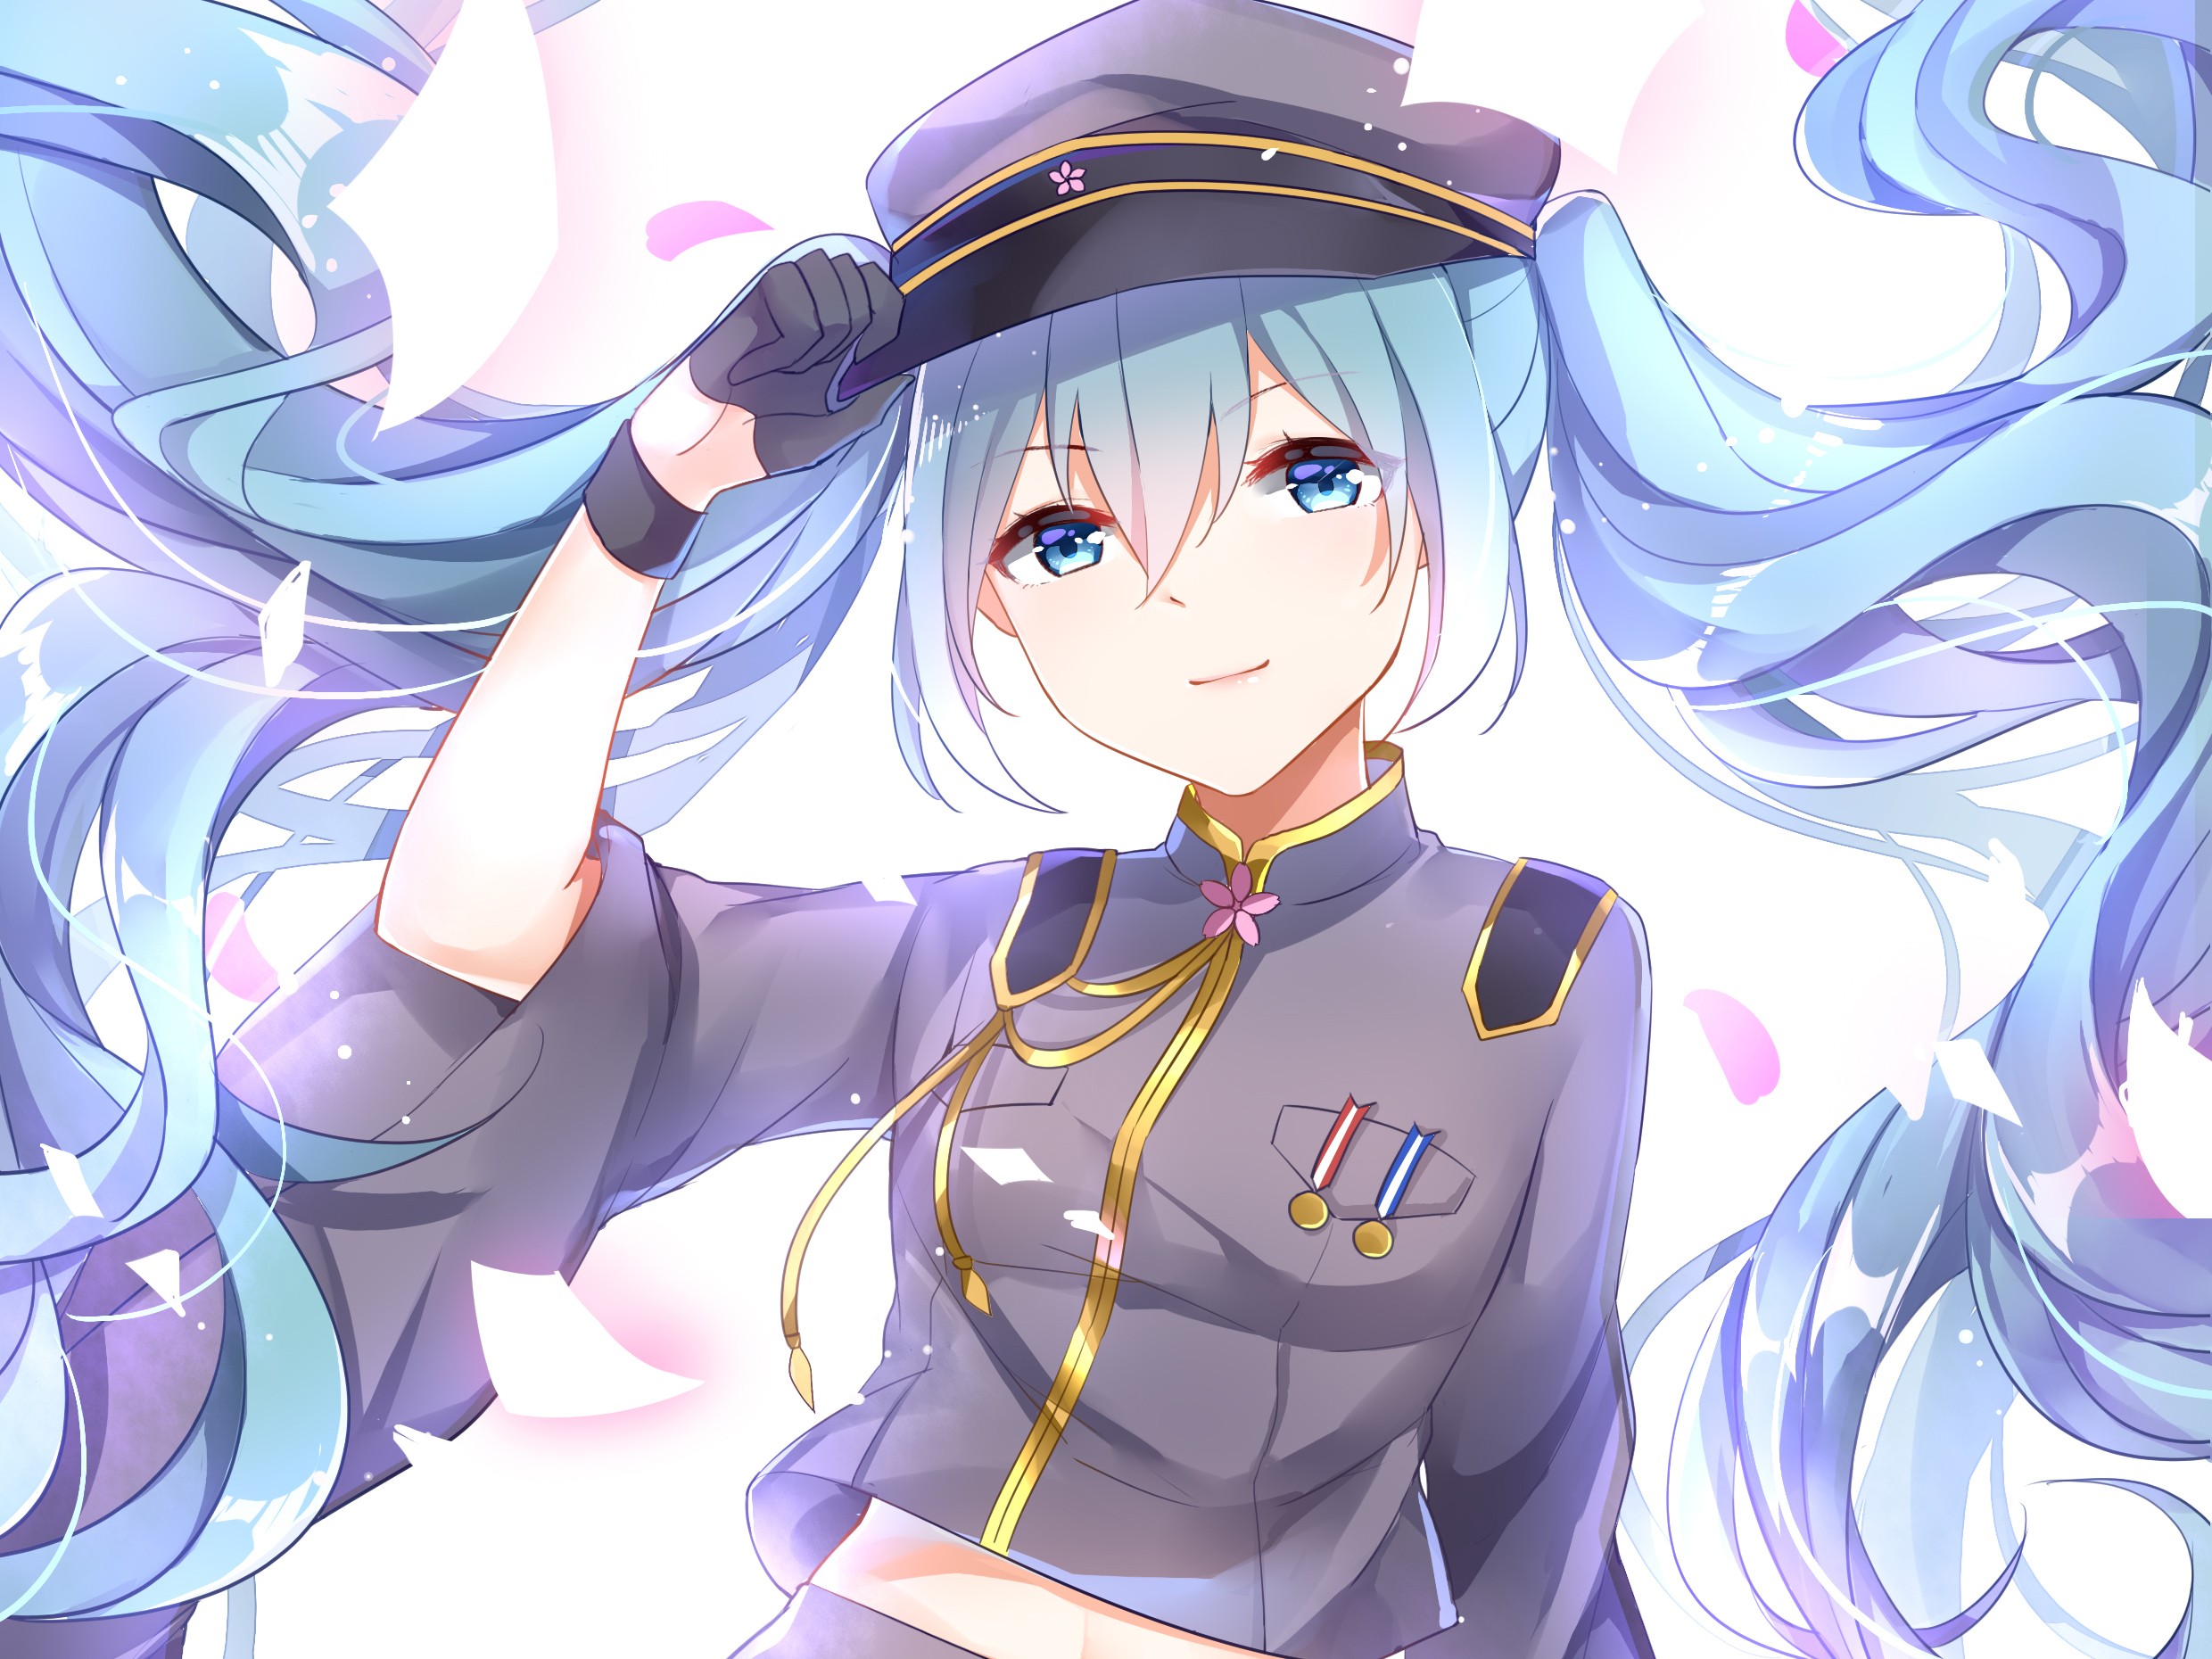 Anime 2480x1860 anime anime girls Vocaloid Hatsune Miku cyan hair blue eyes long hair petals twintails uniform hat Pixiv women with hats looking at viewer